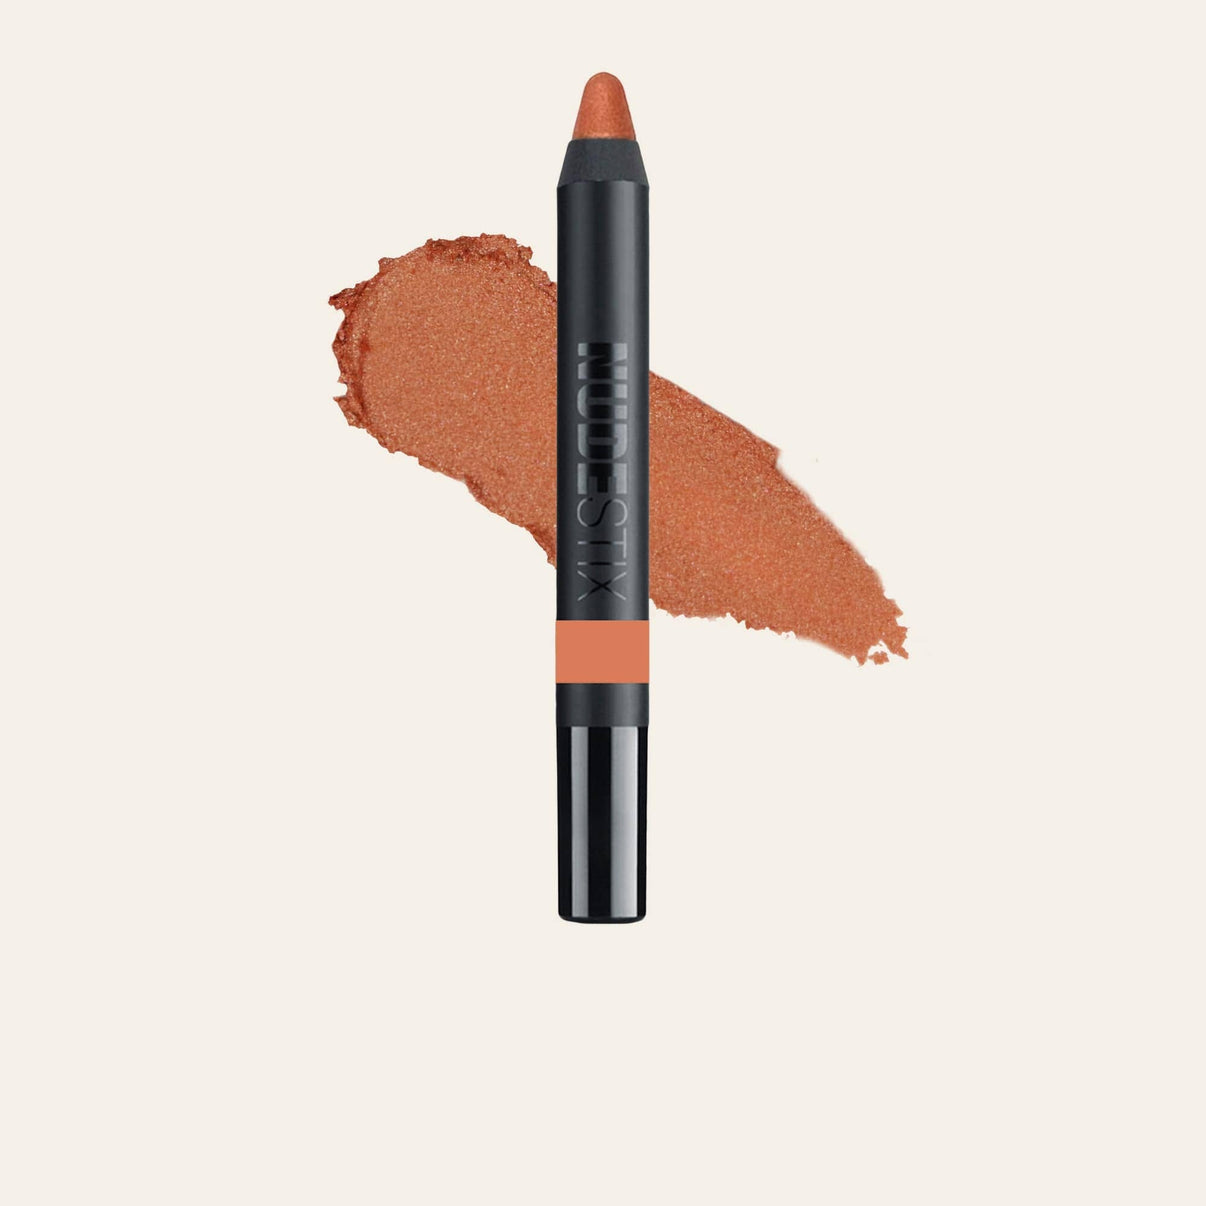 Magnetic Eye Color Eyeshadow Pencil in shade Sunrise Star with texture swatch